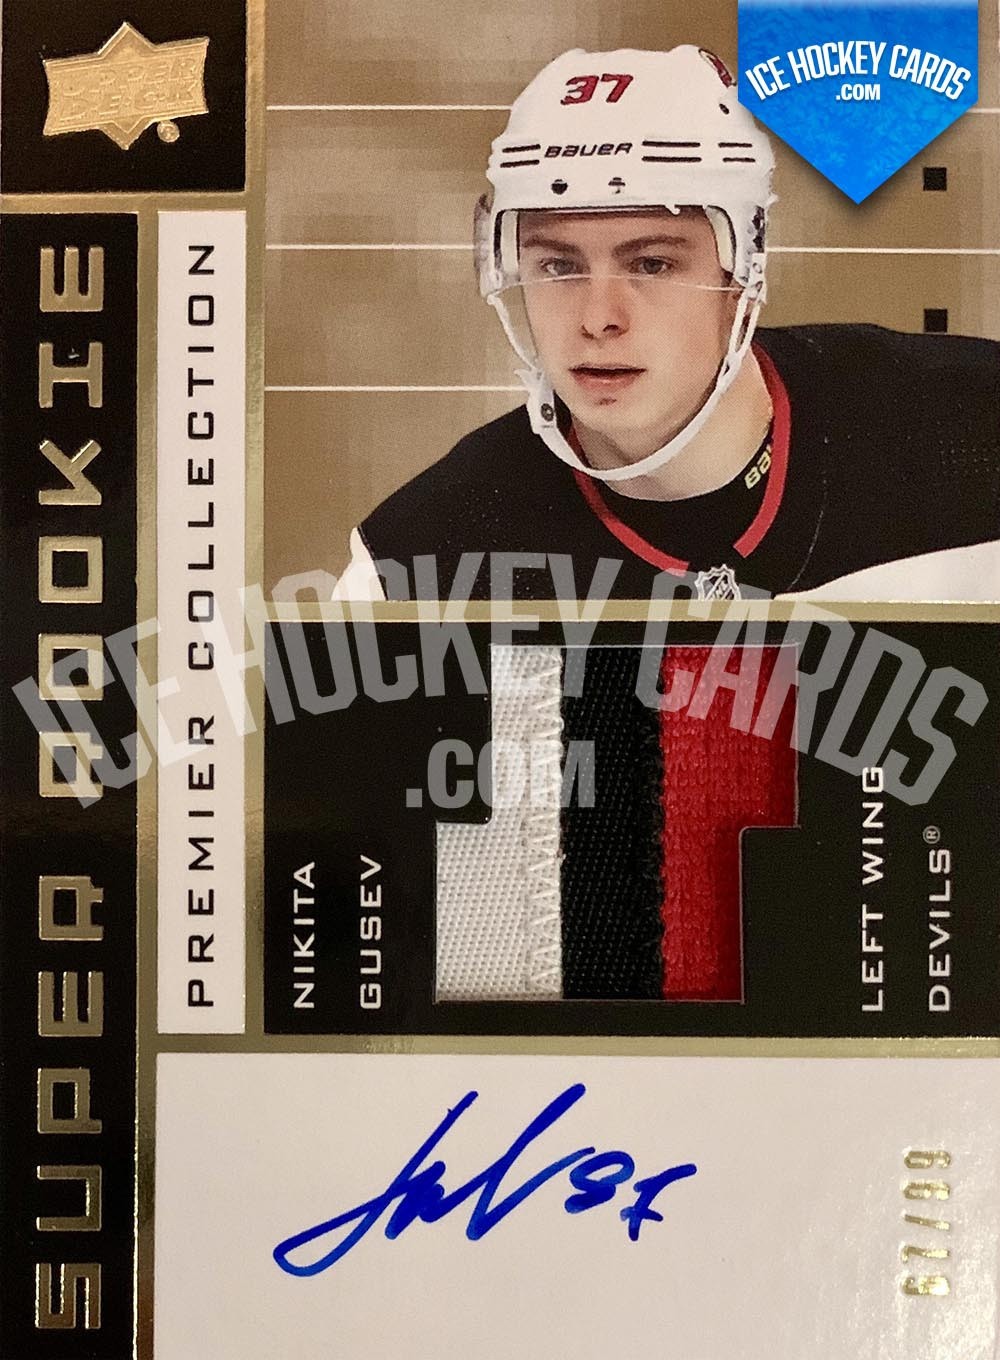 Upper Deck - Premier 2019-20 - Nikita Gusev Super Rookie Premier Collection Rookie Auto Patch Card # to 99